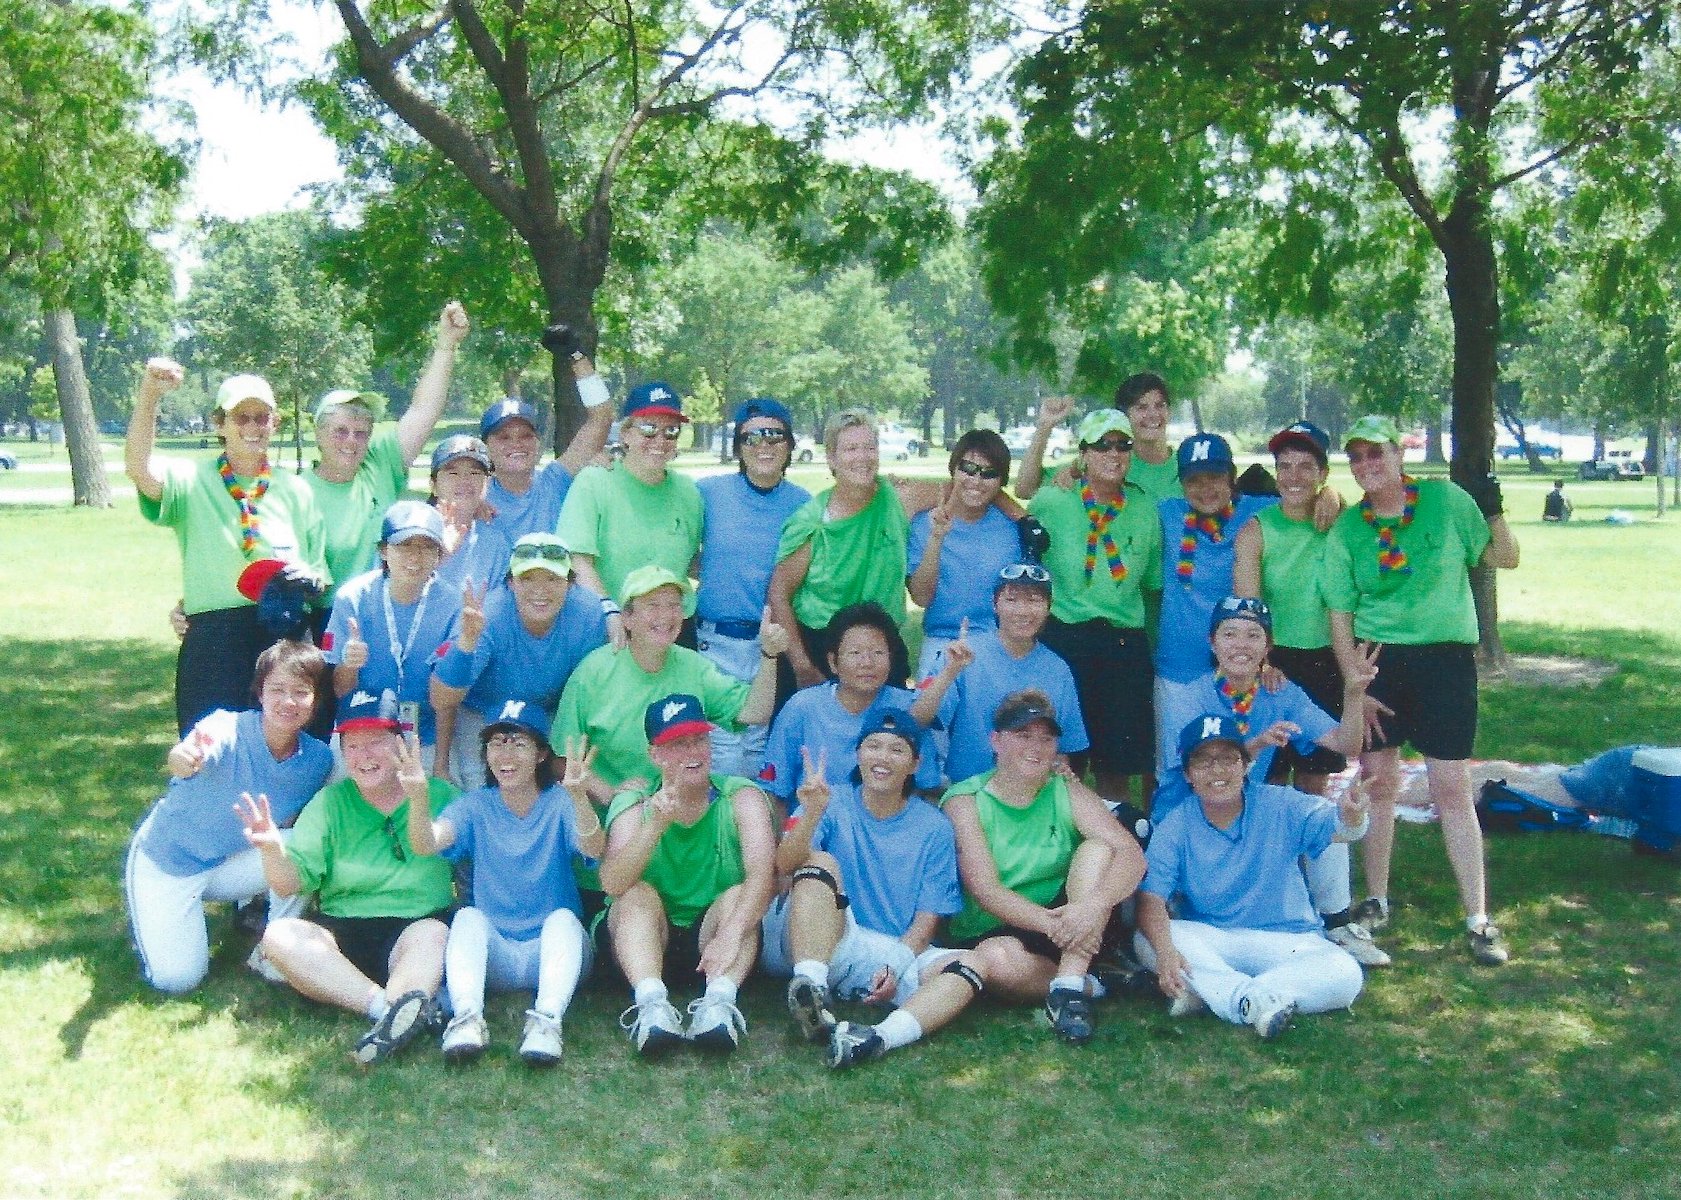 Kim Stacy (placed on the far left in the back row) with her softball team, Custom Designed, in green shirts and the Taiwanese softball team in blue shirts at the Gay Games, Chicago, IL, 2006.